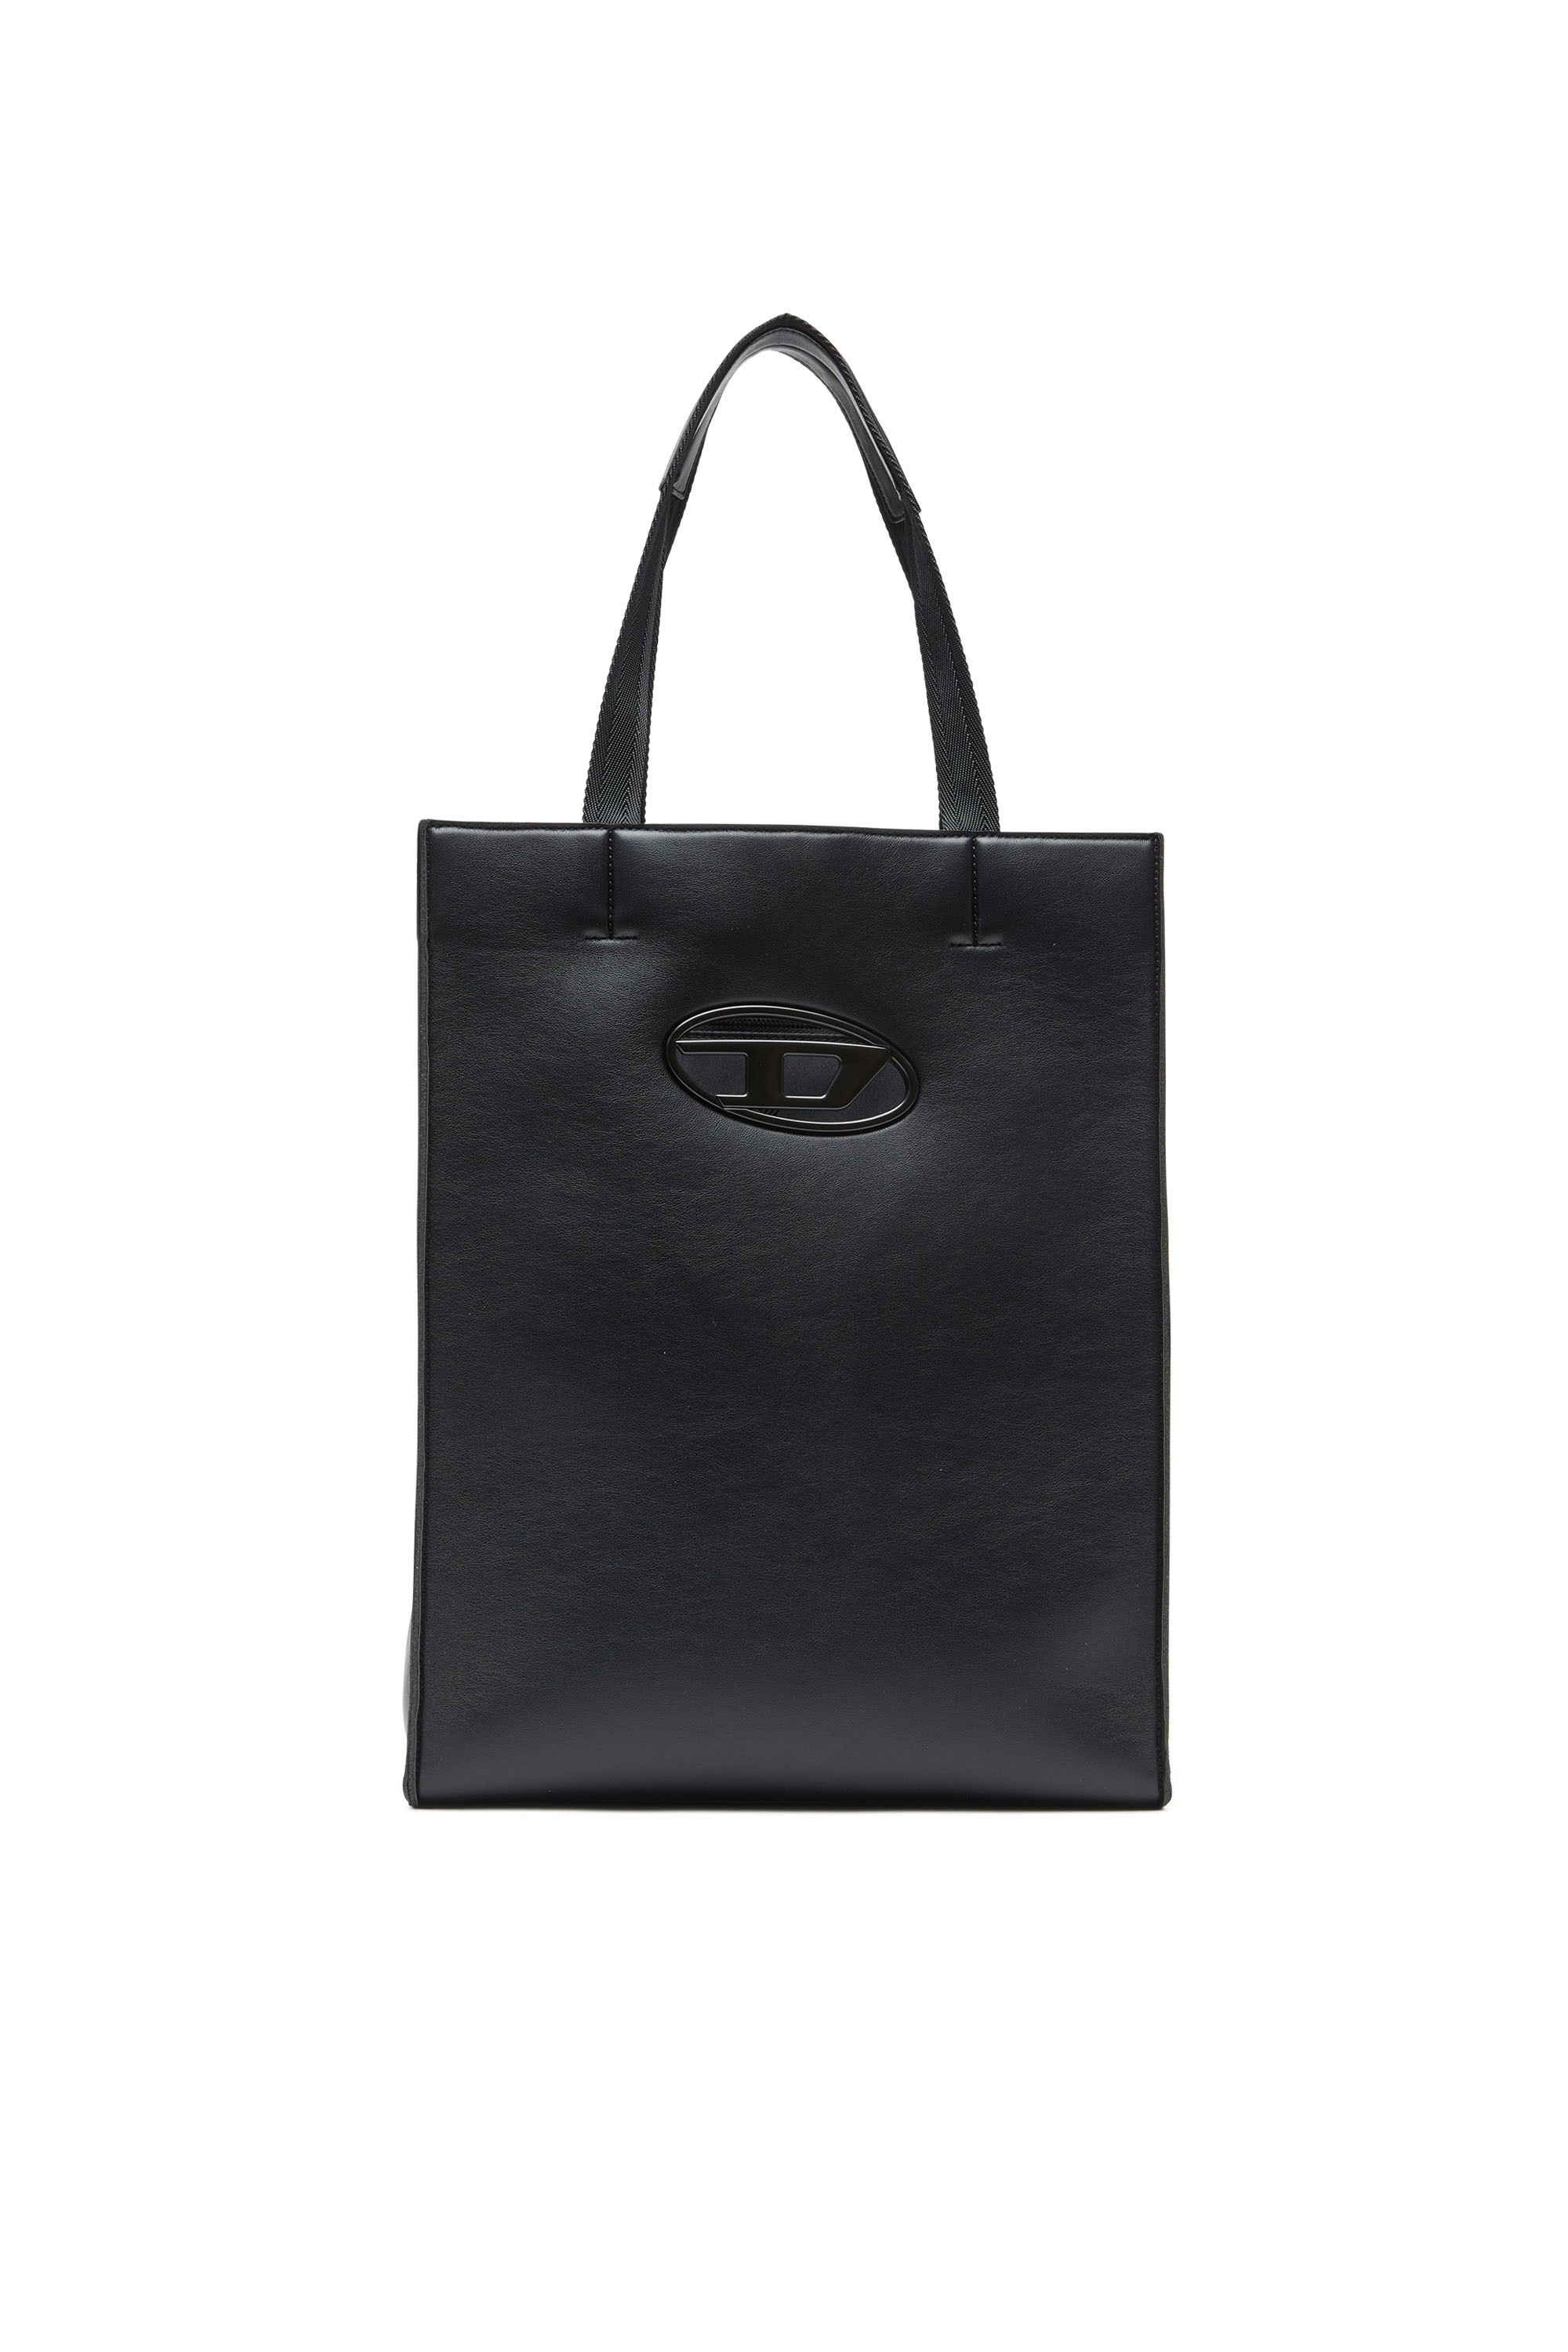 Holi-D-Tote bag in bonded technical fabric